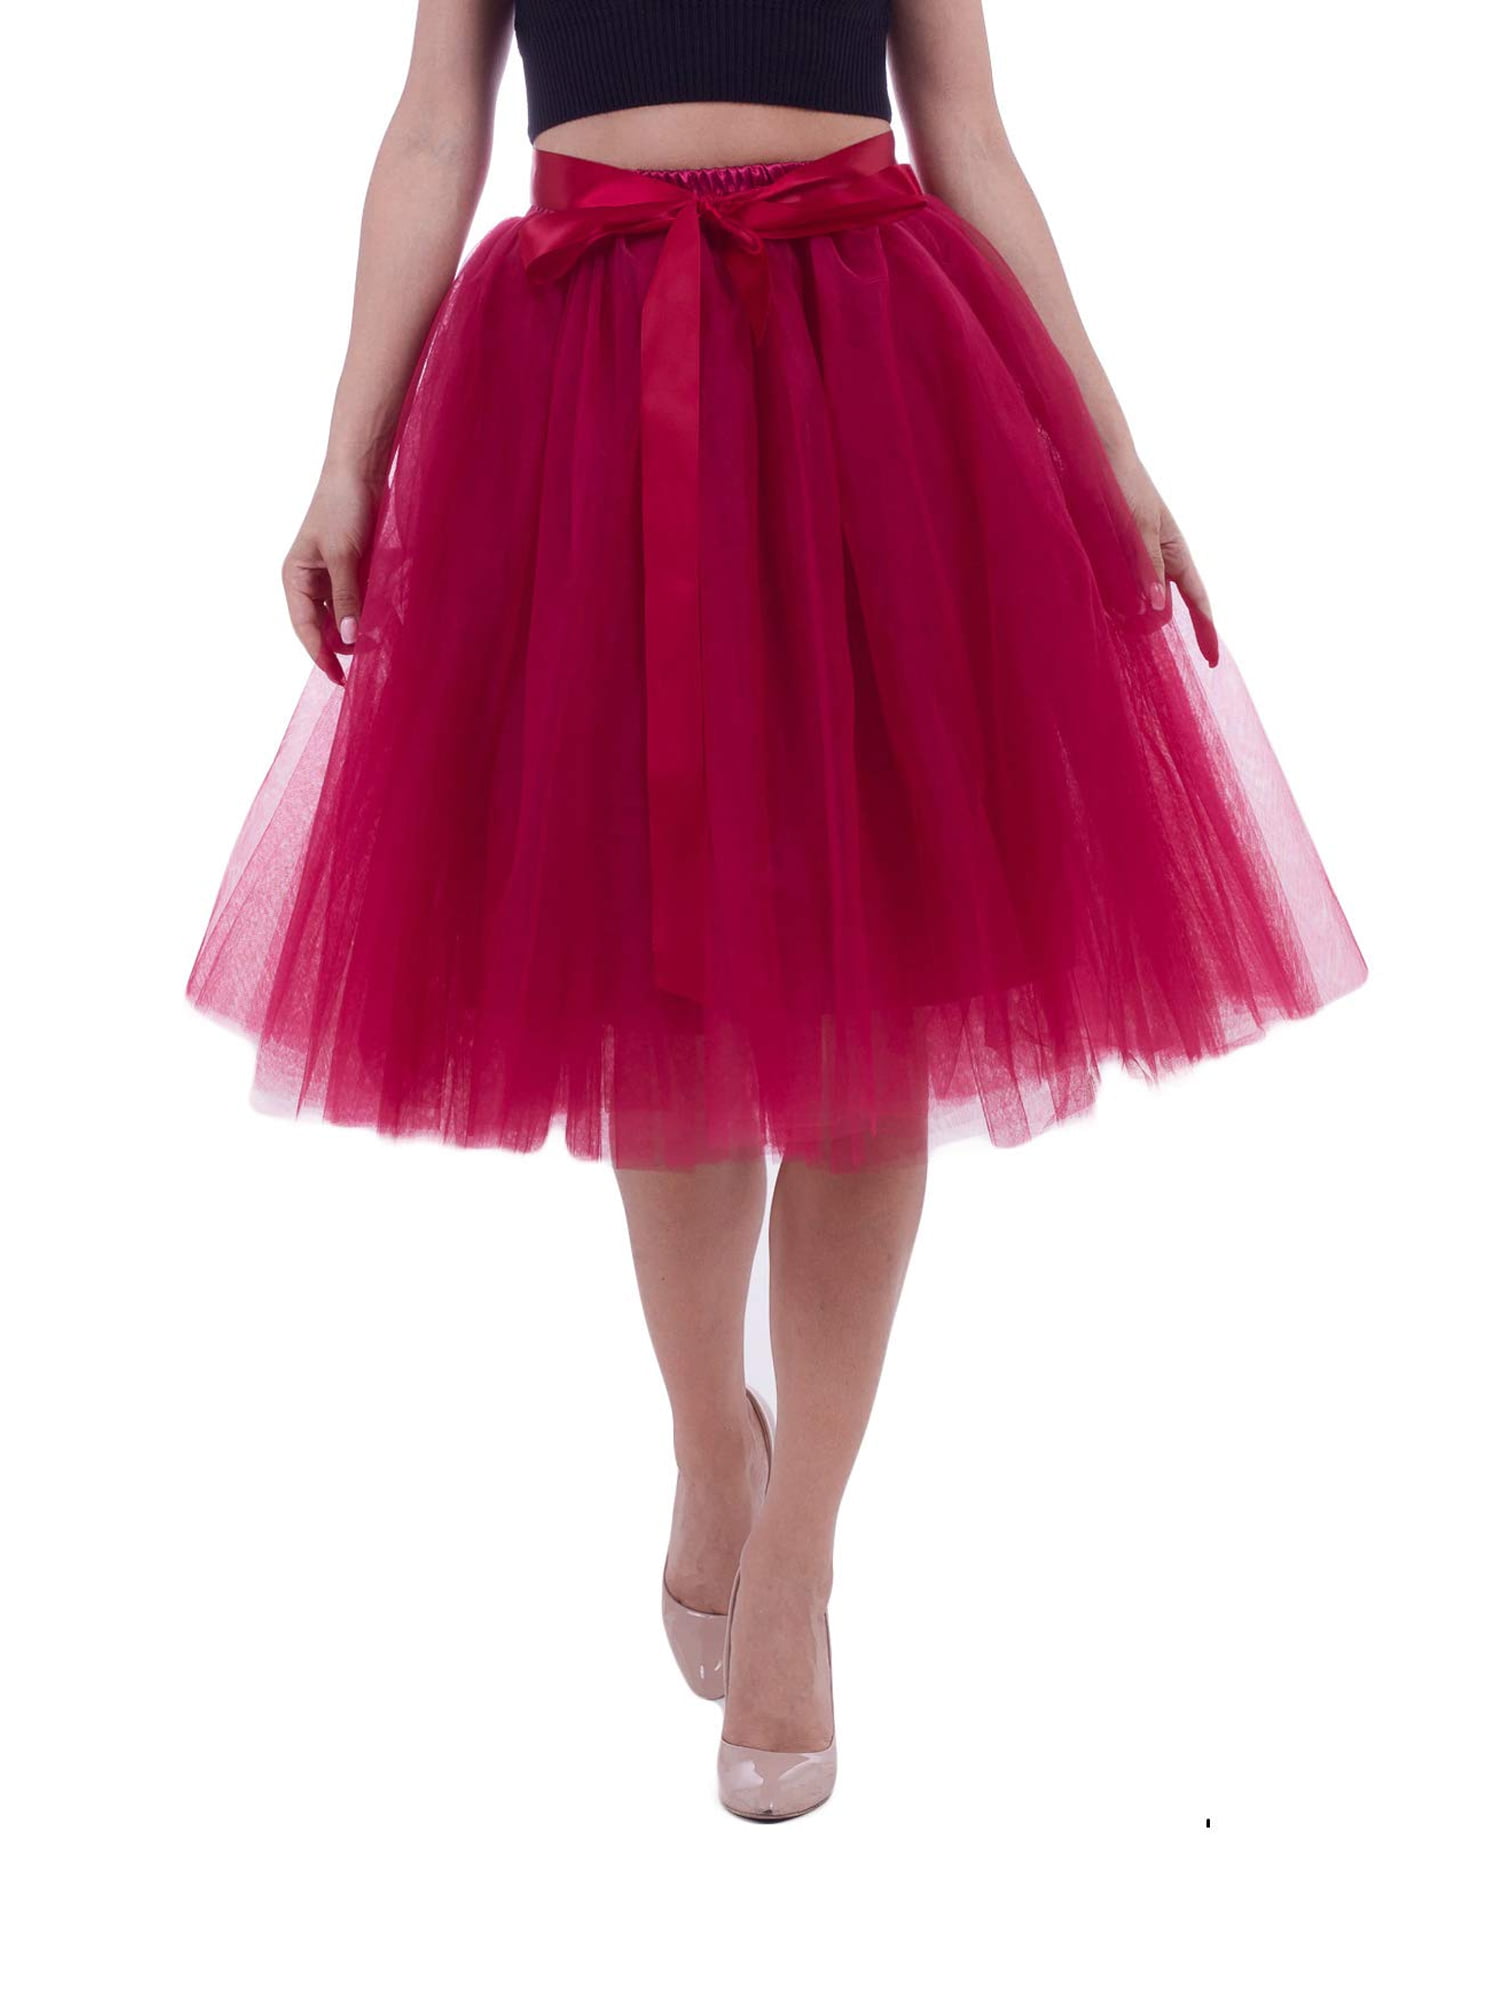 Thenxin Womens A-Line Knee Length Tutu Tulle Prom Party Skirt Layered Pleated Dance Skirt 